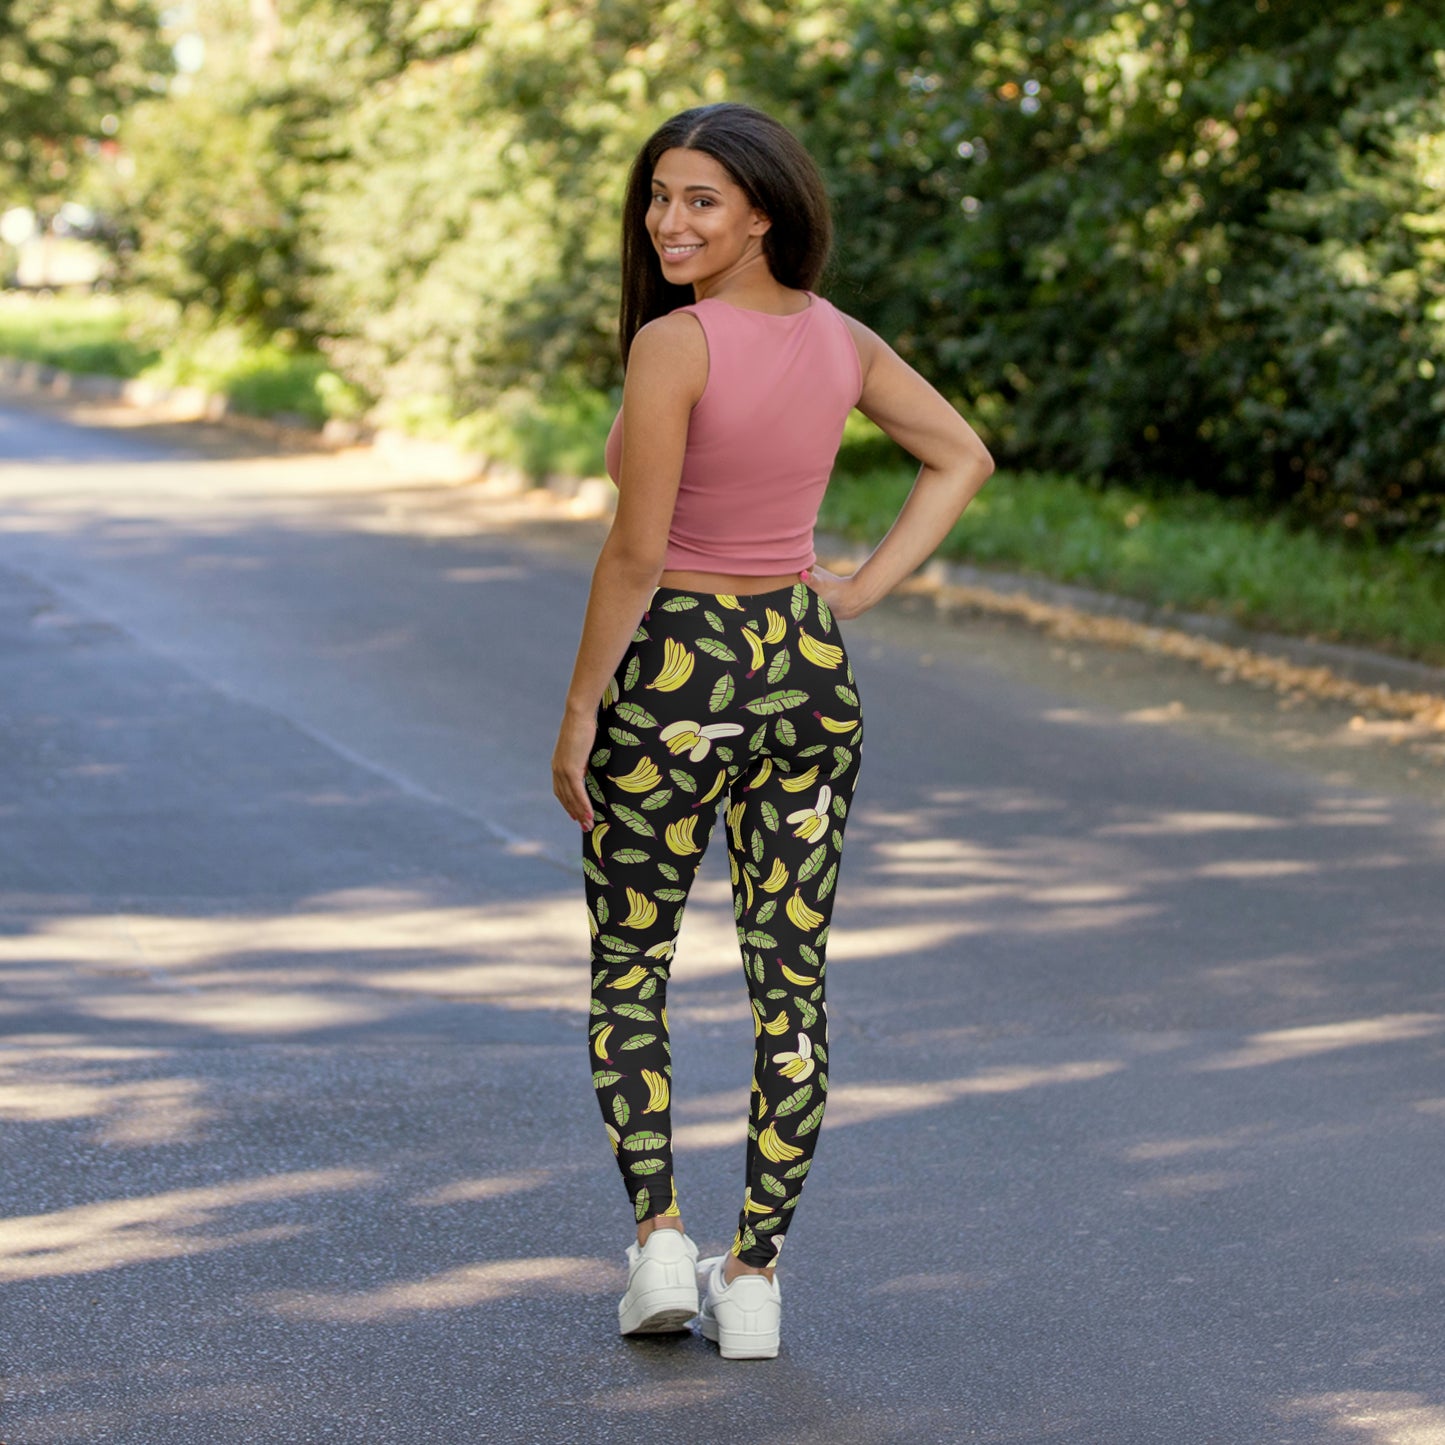 Women's Bananas Fruit Women Leggings, One of a Kind Gift - Unique Workout Activewear tights for Wife, Girlfriend, Mothers Day Gift